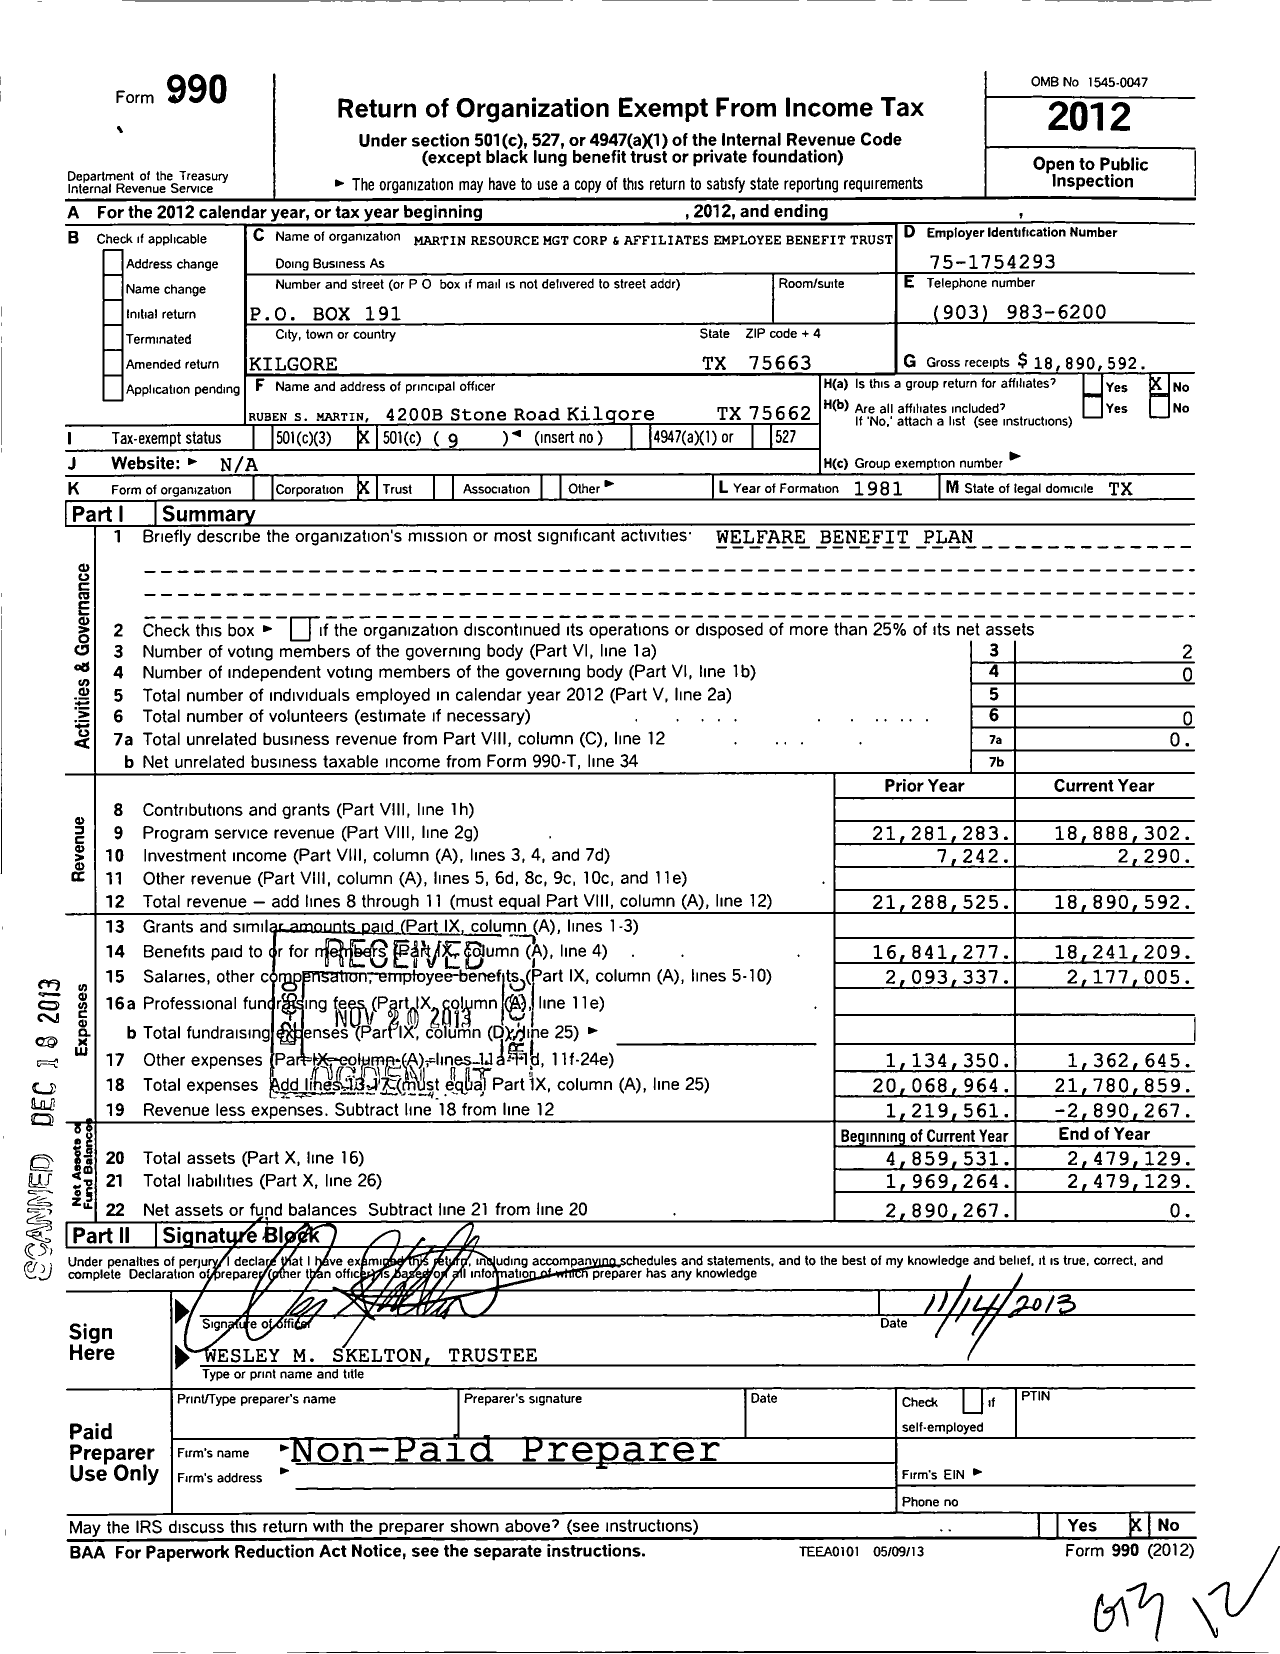 Image of first page of 2012 Form 990O for Martin Resource MGT Corp and Affiliates Employee Benefit Trust